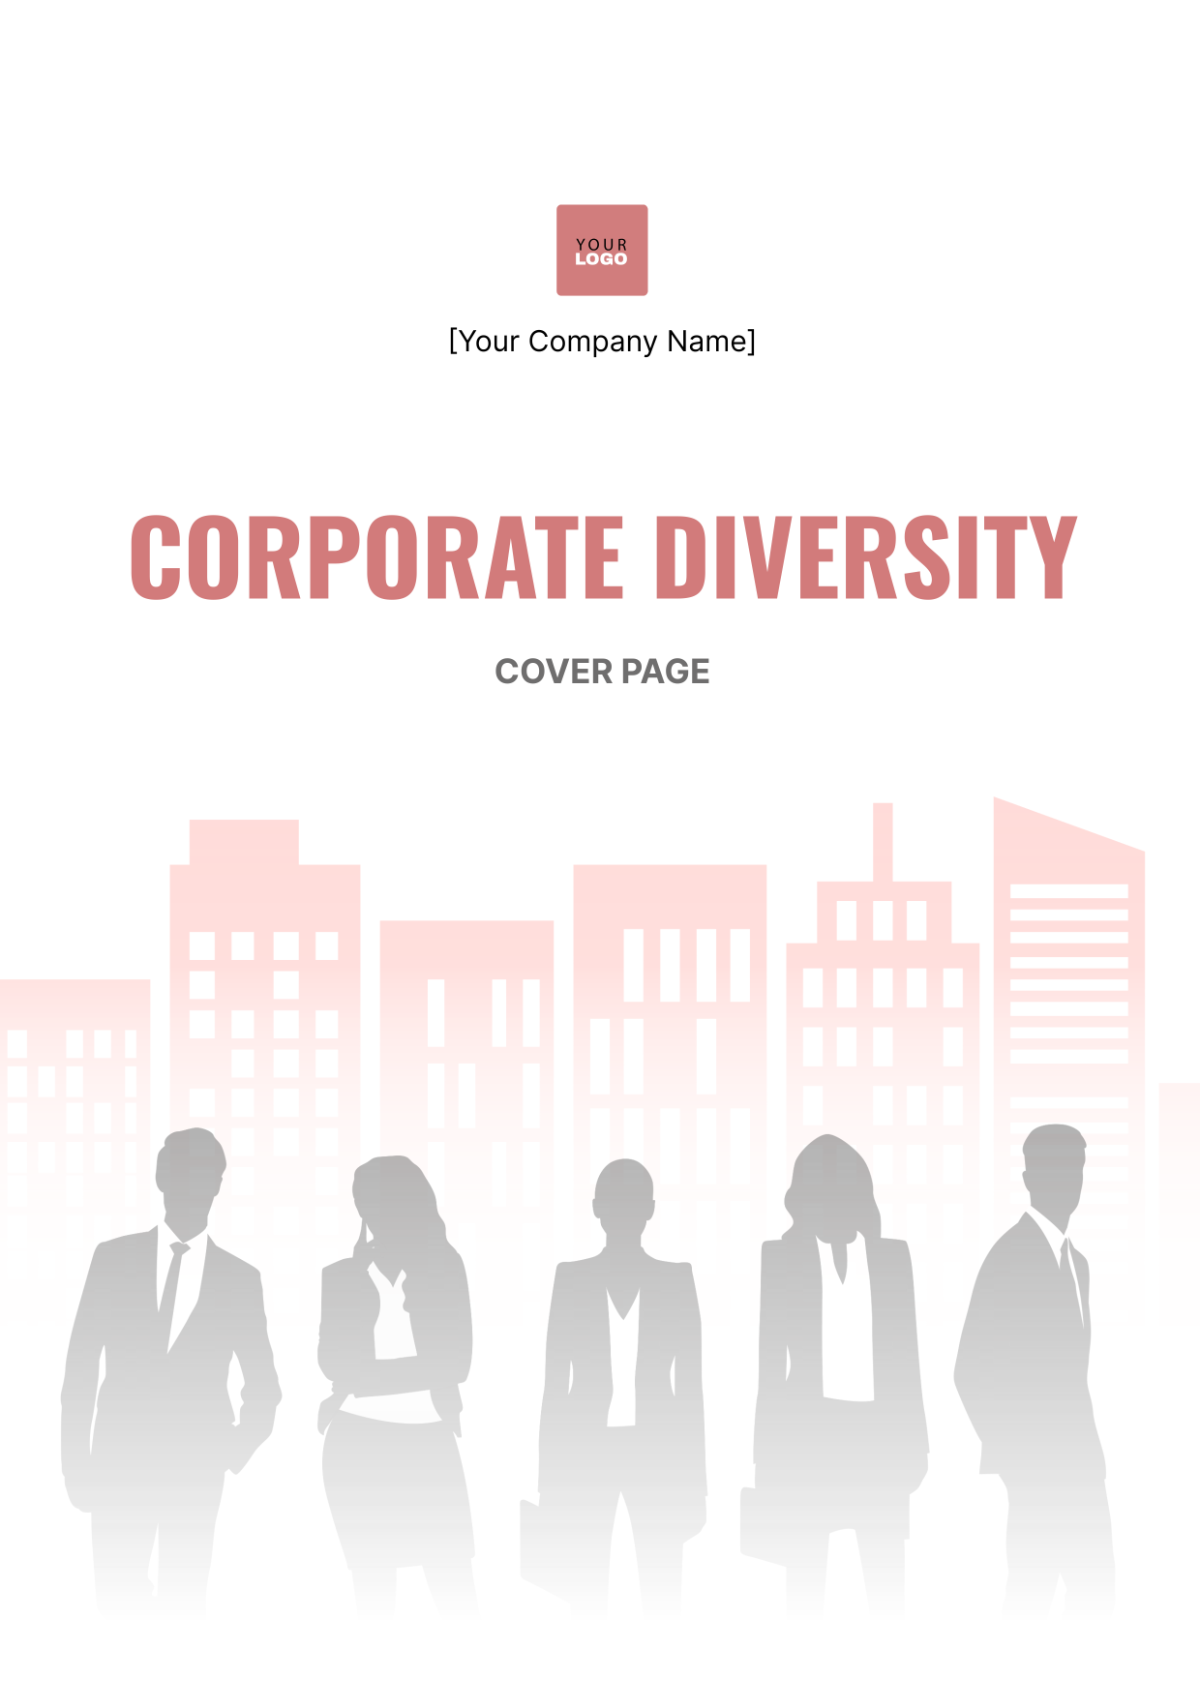 Corporate Diversity Cover Page Template